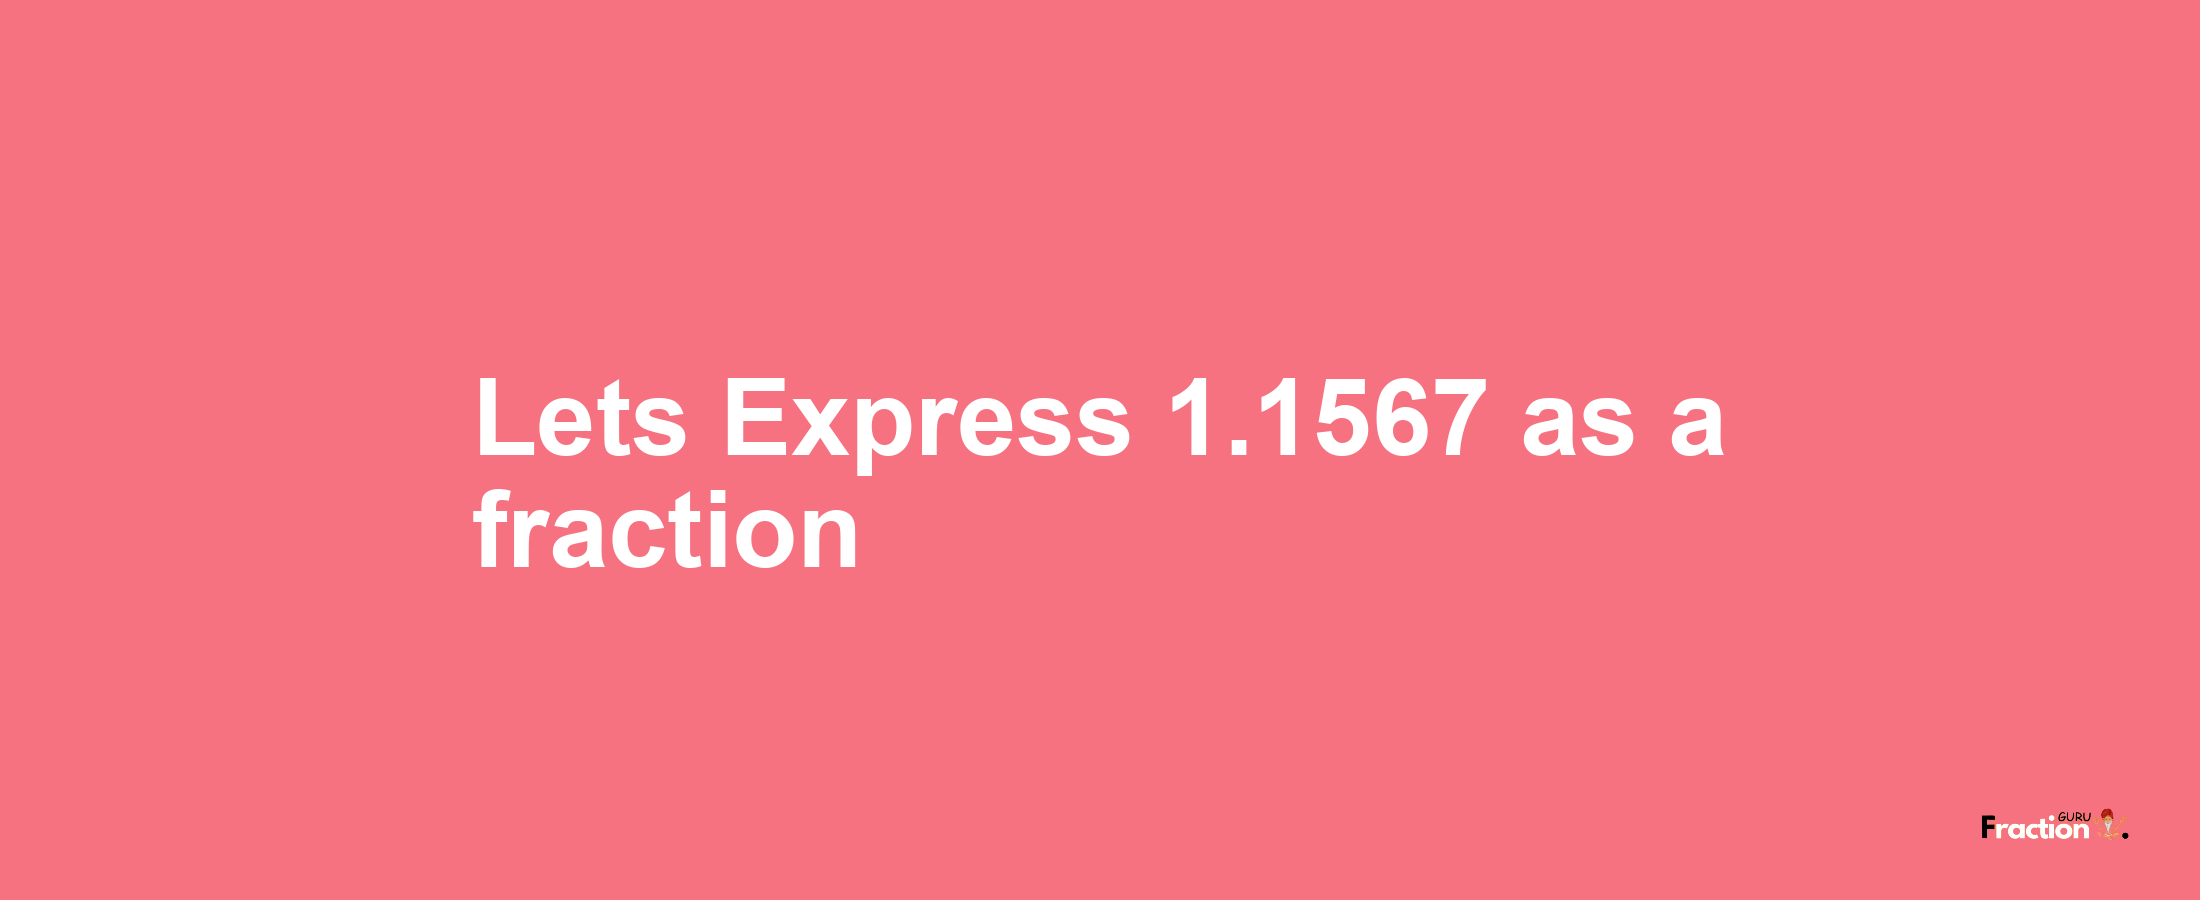 Lets Express 1.1567 as afraction